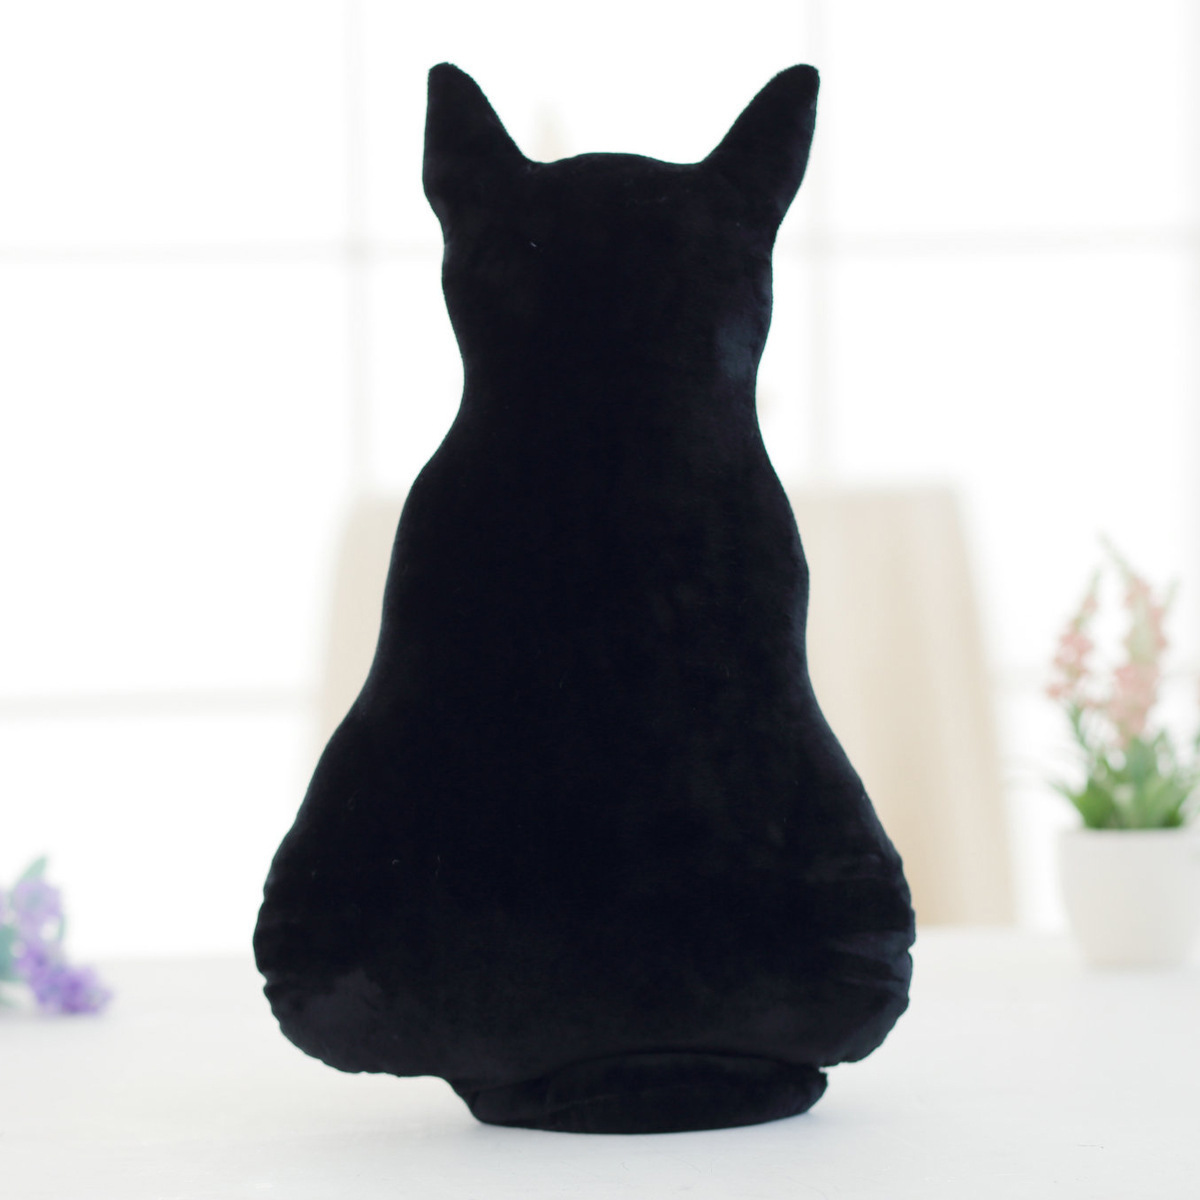 Cat Plushies: Large Adorable Plush Pillow for Kids & Cat Lovers